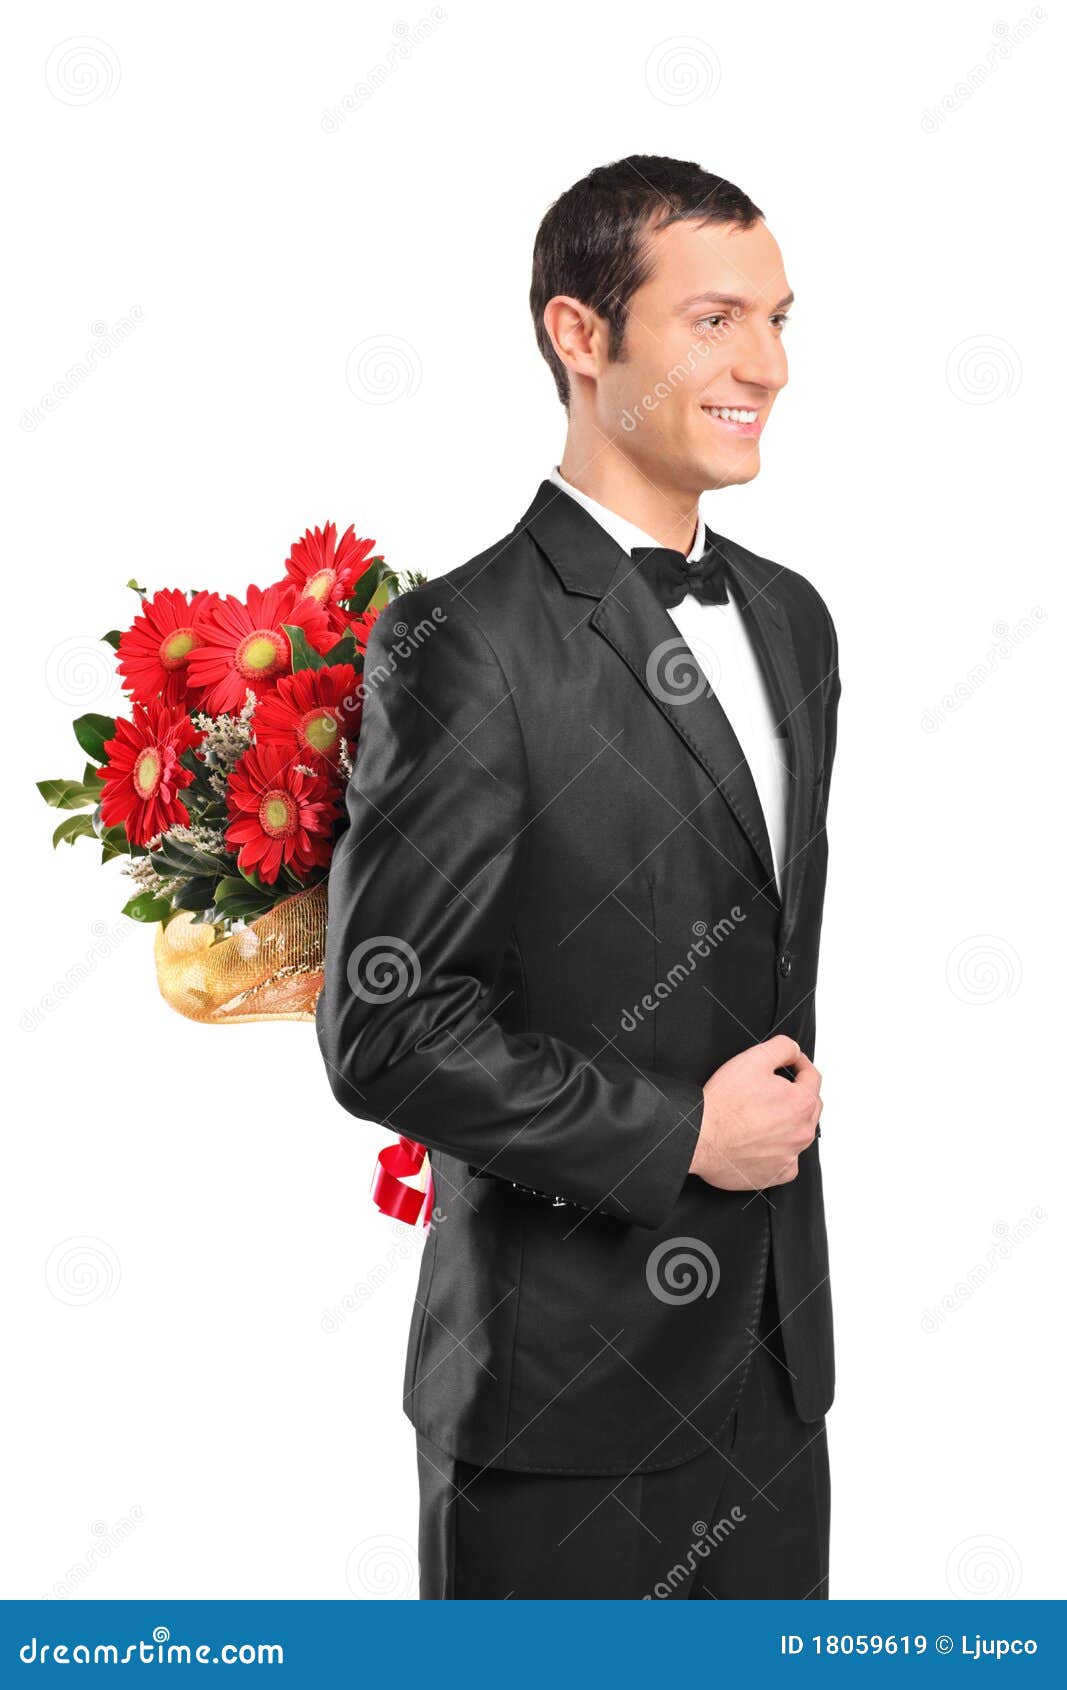 Man Hiding A Bouquet Of Flowers Behind His Back Stock Image - Image of ...